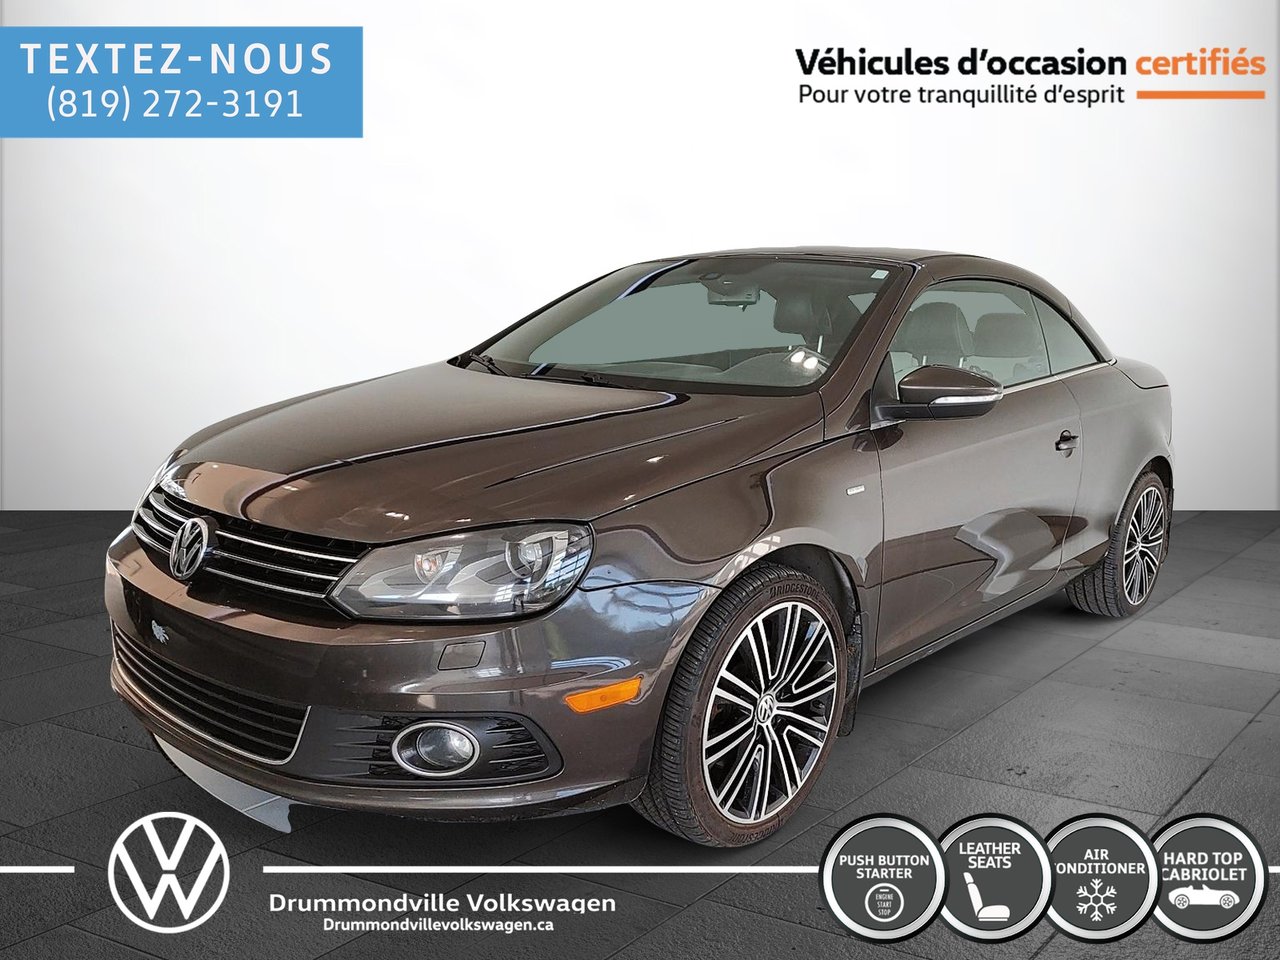 Used 2015 Volkswagen Eos with 124,132 km for sale at Otogo